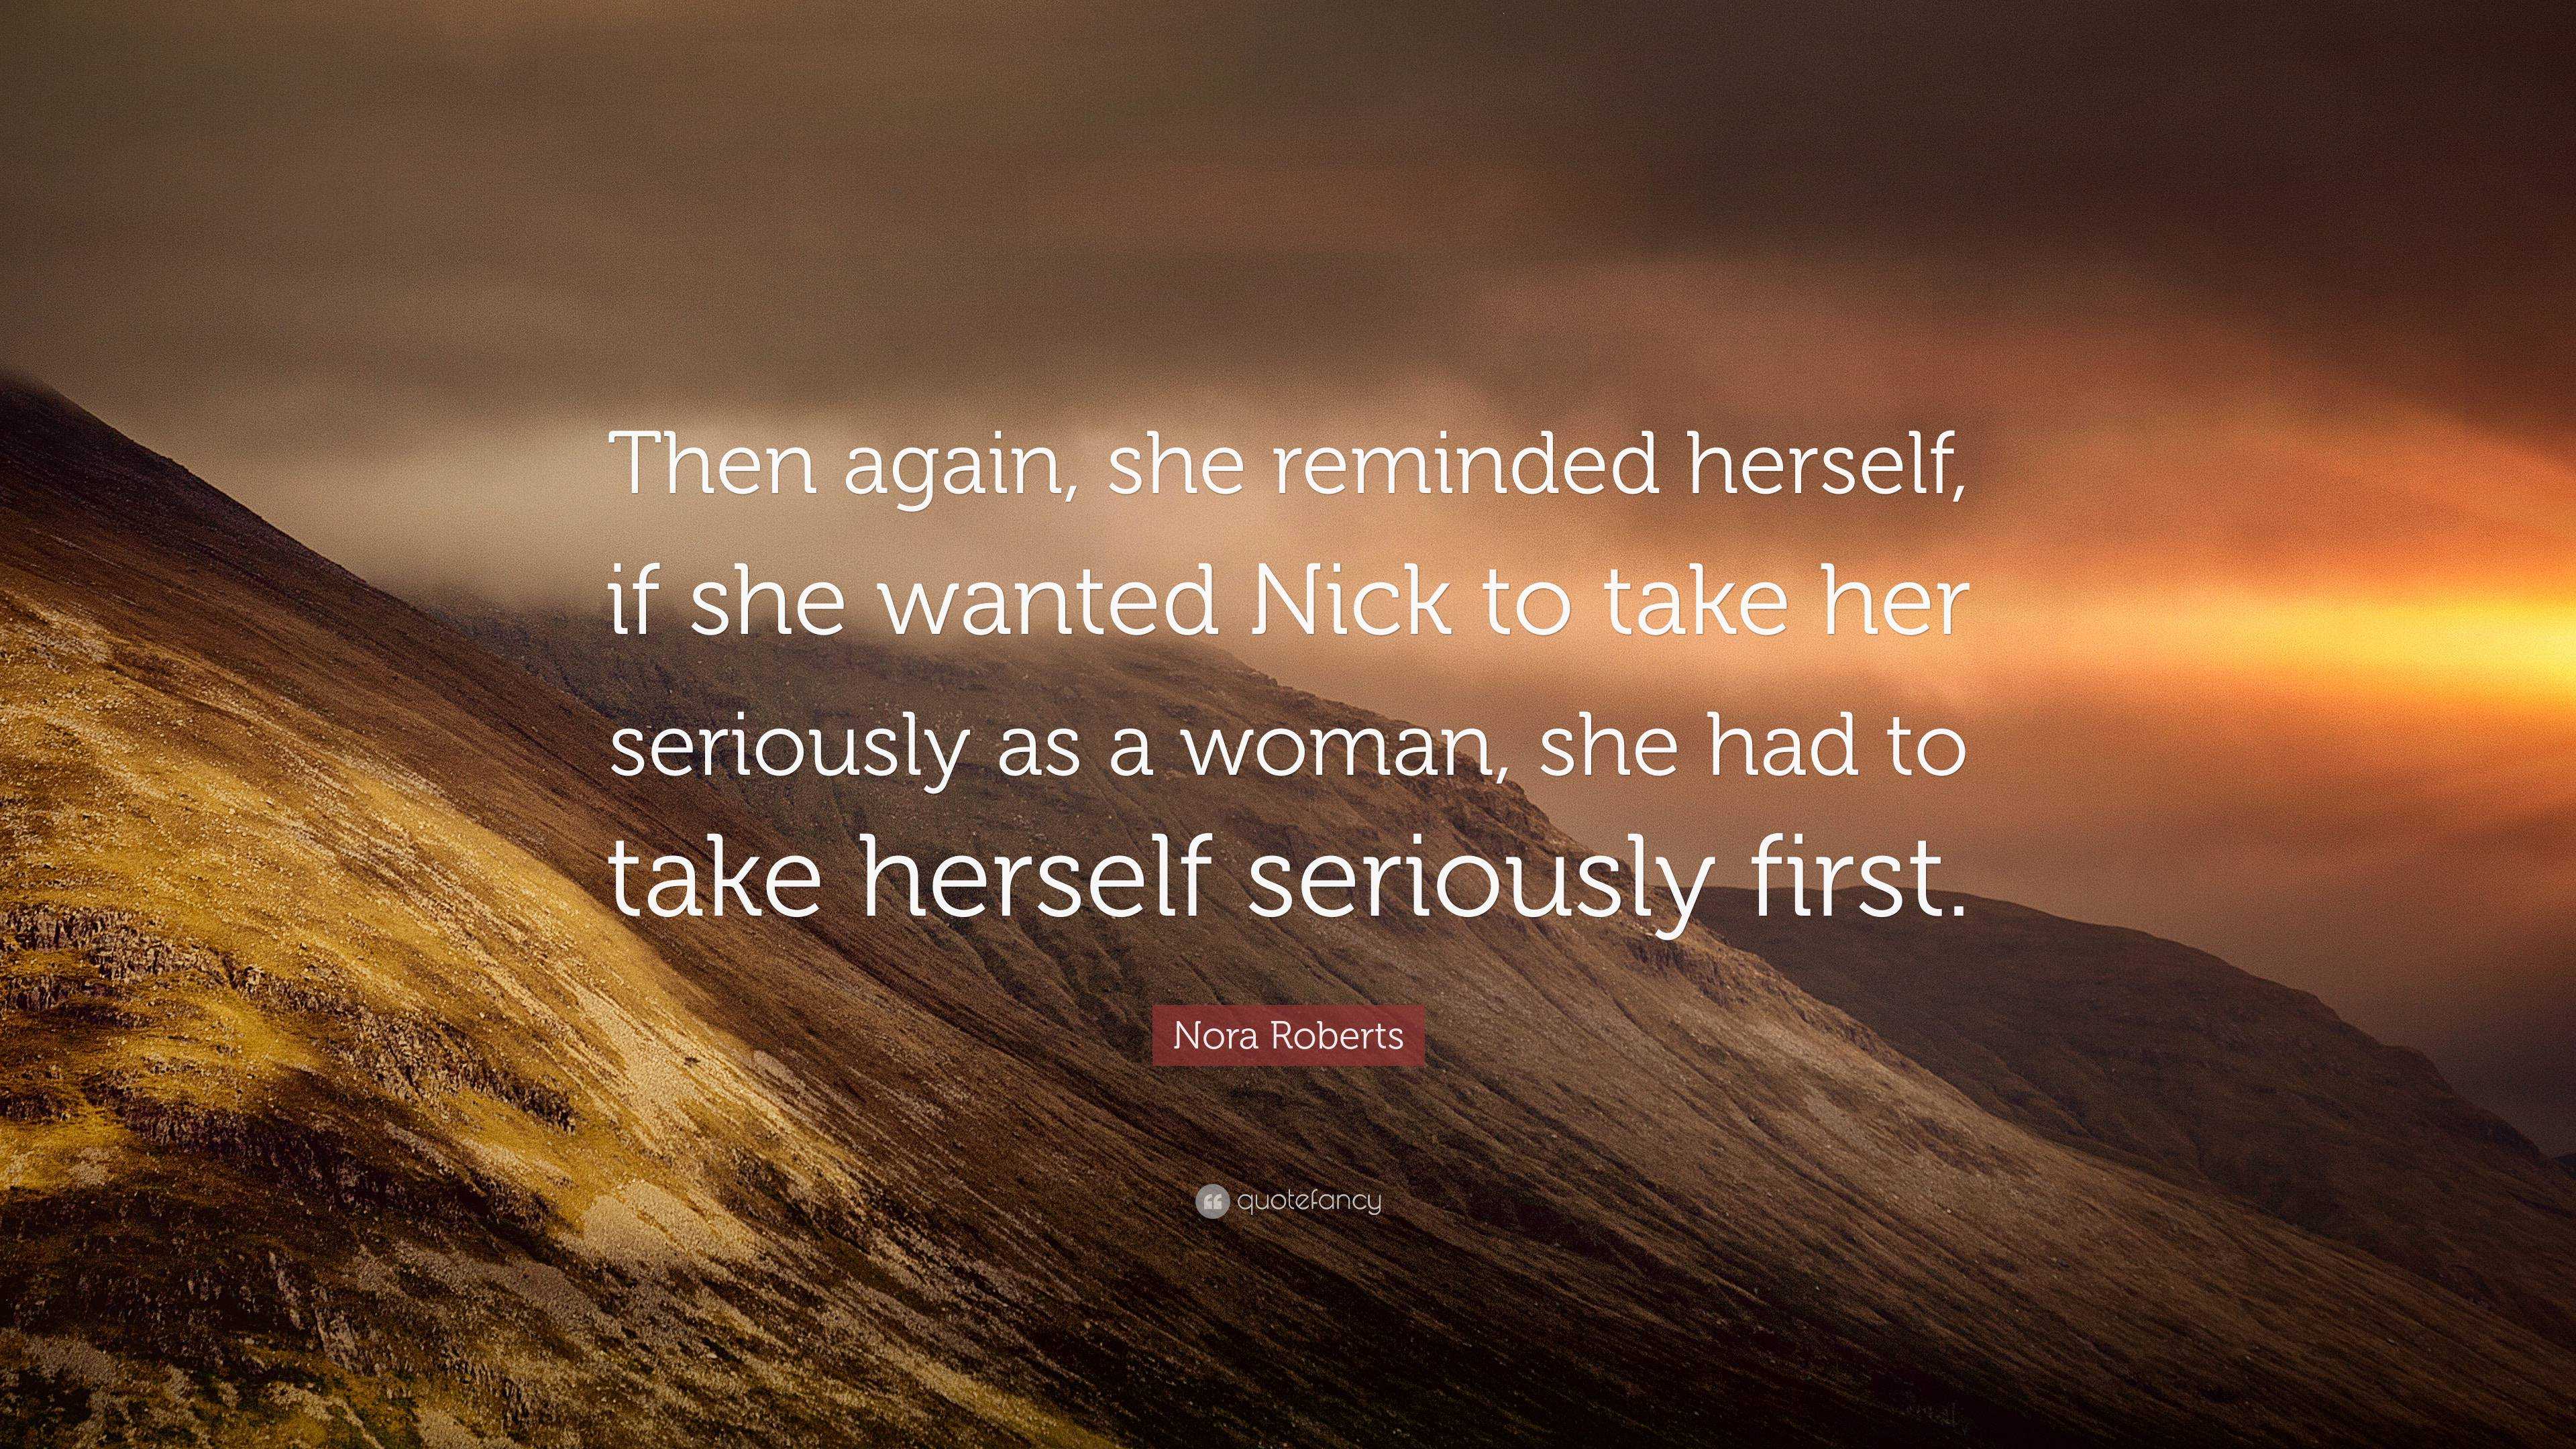 Nora Roberts Quote: “Then again, she reminded herself, if she wanted ...